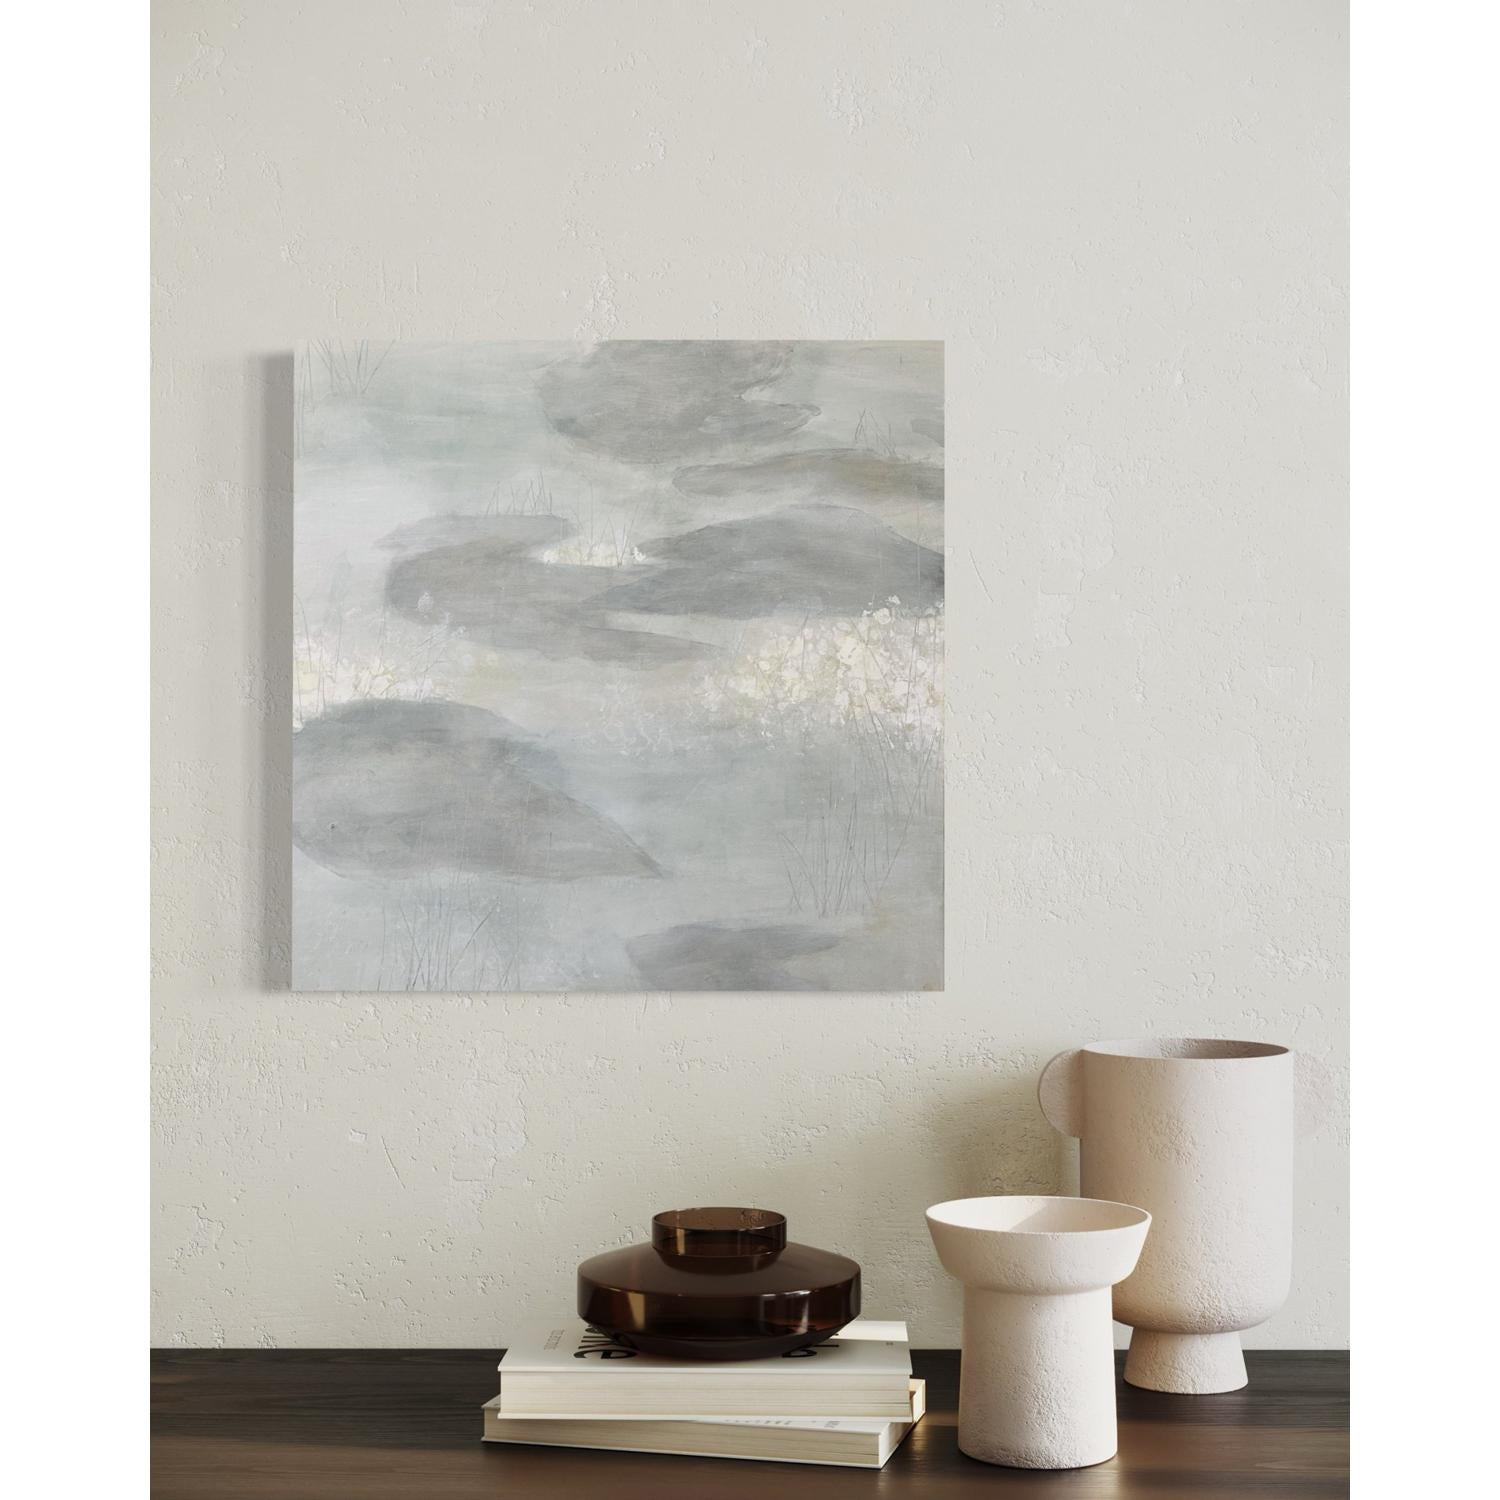 The Pond in February 2, lily pond, neutral, soft art For Sale 1